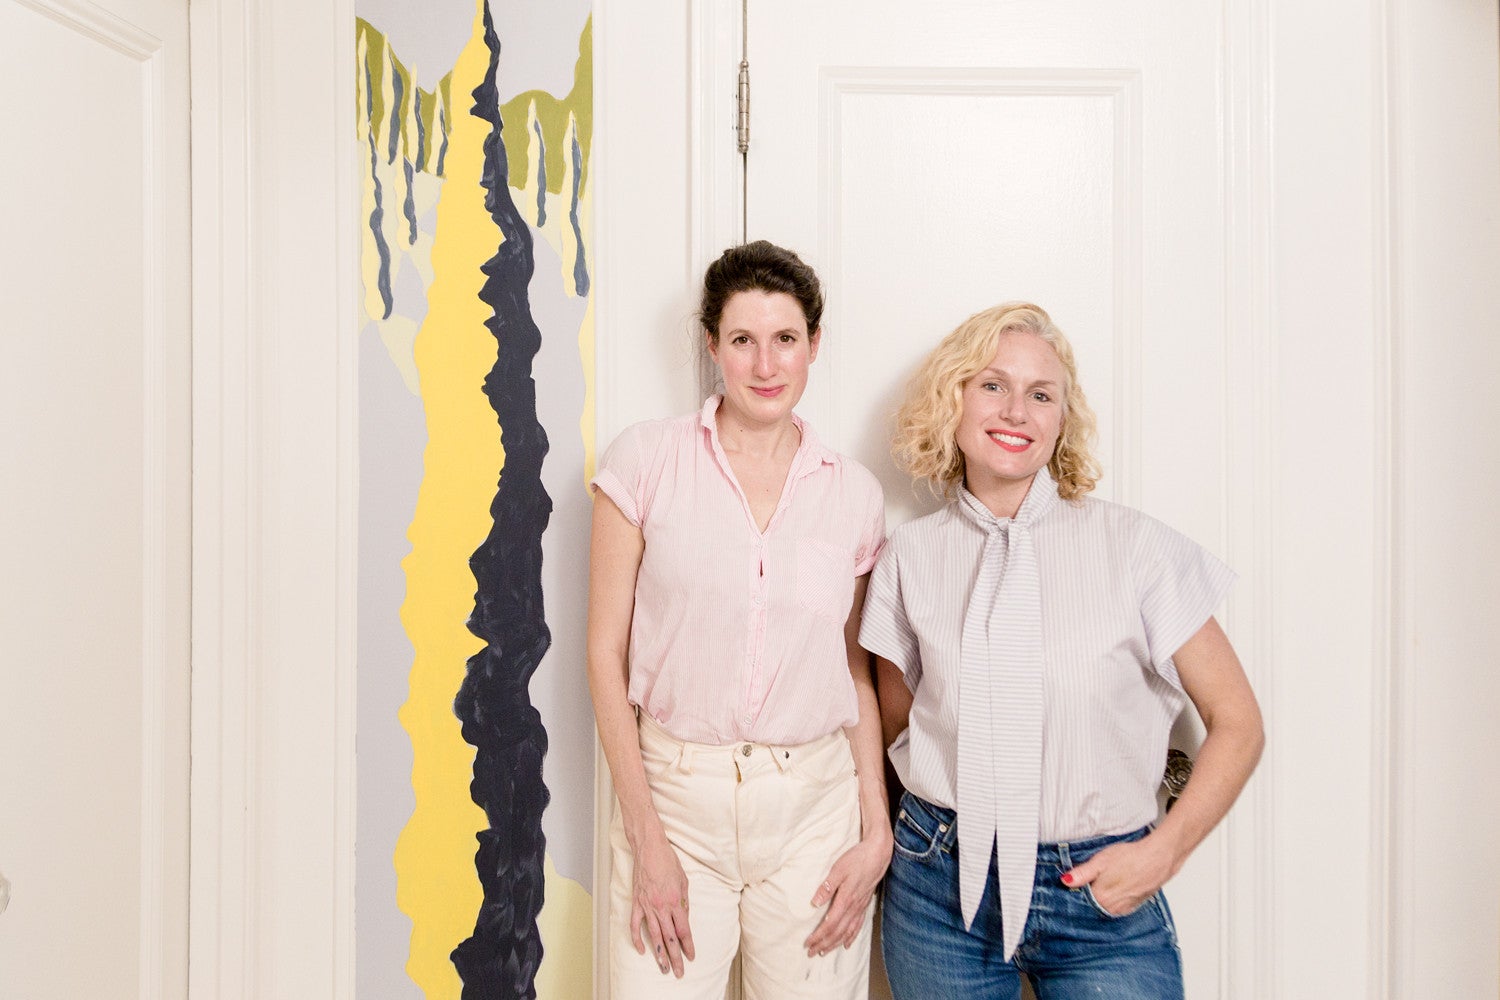 A Playful, Personalized Mural Charms an Upper East Side Entryway